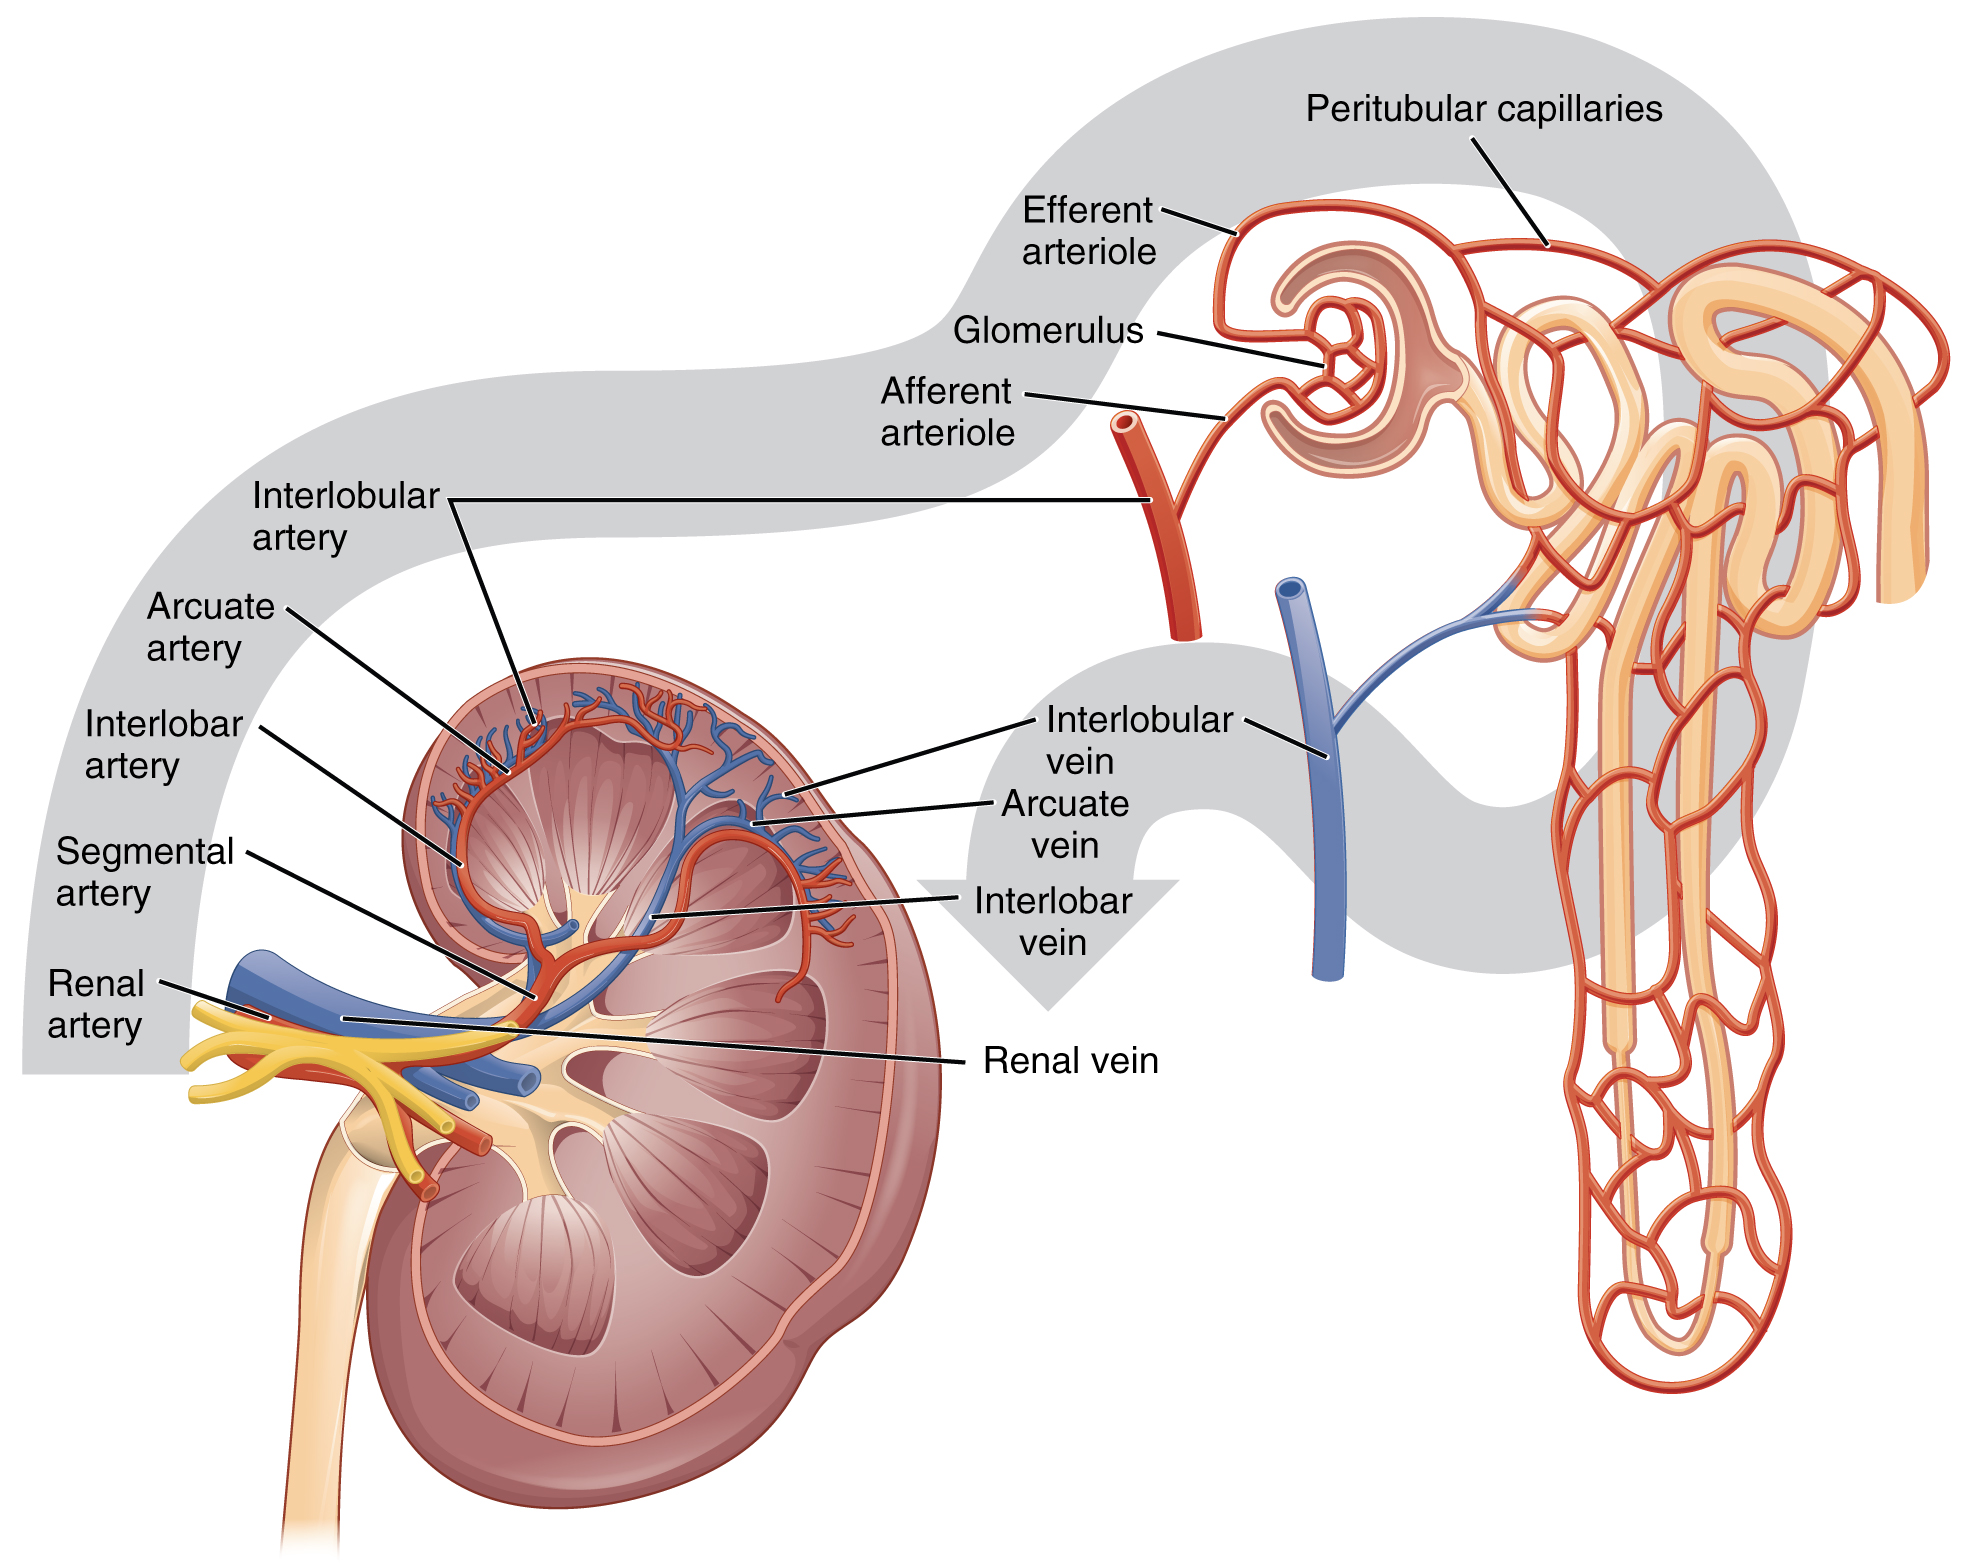 This figure shows the network of blood vessels and the blood flow in the kidneys.